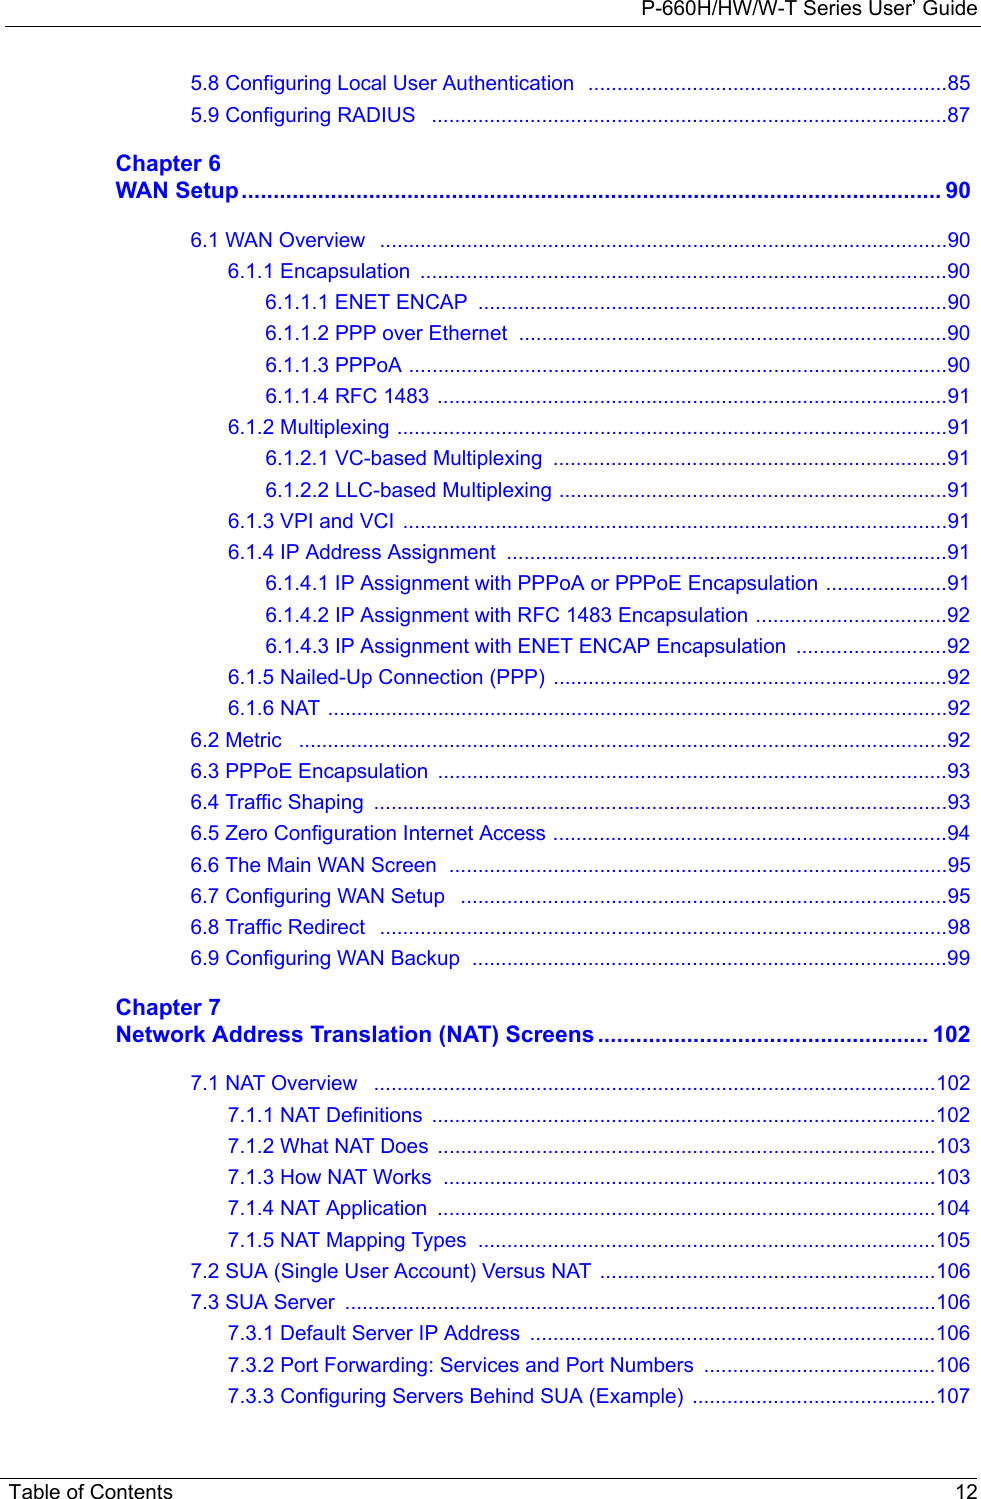 P-660H/HW/W-T Series User’ GuideTable of Contents 125.8 Configuring Local User Authentication  ..............................................................855.9 Configuring RADIUS   .........................................................................................87Chapter 6WAN Setup.............................................................................................................. 906.1 WAN Overview   ..................................................................................................906.1.1 Encapsulation  ...........................................................................................906.1.1.1 ENET ENCAP  .................................................................................906.1.1.2 PPP over Ethernet  ..........................................................................906.1.1.3 PPPoA .............................................................................................906.1.1.4 RFC 1483 ........................................................................................916.1.2 Multiplexing ...............................................................................................916.1.2.1 VC-based Multiplexing  ....................................................................916.1.2.2 LLC-based Multiplexing ...................................................................916.1.3 VPI and VCI  ..............................................................................................916.1.4 IP Address Assignment  ............................................................................916.1.4.1 IP Assignment with PPPoA or PPPoE Encapsulation .....................916.1.4.2 IP Assignment with RFC 1483 Encapsulation .................................926.1.4.3 IP Assignment with ENET ENCAP Encapsulation  ..........................926.1.5 Nailed-Up Connection (PPP) ....................................................................926.1.6 NAT ...........................................................................................................926.2 Metric   ................................................................................................................926.3 PPPoE Encapsulation  ........................................................................................936.4 Traffic Shaping  ...................................................................................................936.5 Zero Configuration Internet Access ....................................................................946.6 The Main WAN Screen  ......................................................................................956.7 Configuring WAN Setup   ....................................................................................956.8 Traffic Redirect   ..................................................................................................986.9 Configuring WAN Backup  ..................................................................................99Chapter 7Network Address Translation (NAT) Screens .................................................... 1027.1 NAT Overview   .................................................................................................1027.1.1 NAT Definitions  .......................................................................................1027.1.2 What NAT Does  ......................................................................................1037.1.3 How NAT Works  .....................................................................................1037.1.4 NAT Application  ......................................................................................1047.1.5 NAT Mapping Types  ...............................................................................1057.2 SUA (Single User Account) Versus NAT ..........................................................1067.3 SUA Server  ......................................................................................................1067.3.1 Default Server IP Address  ......................................................................1067.3.2 Port Forwarding: Services and Port Numbers  ........................................1067.3.3 Configuring Servers Behind SUA (Example) ..........................................107